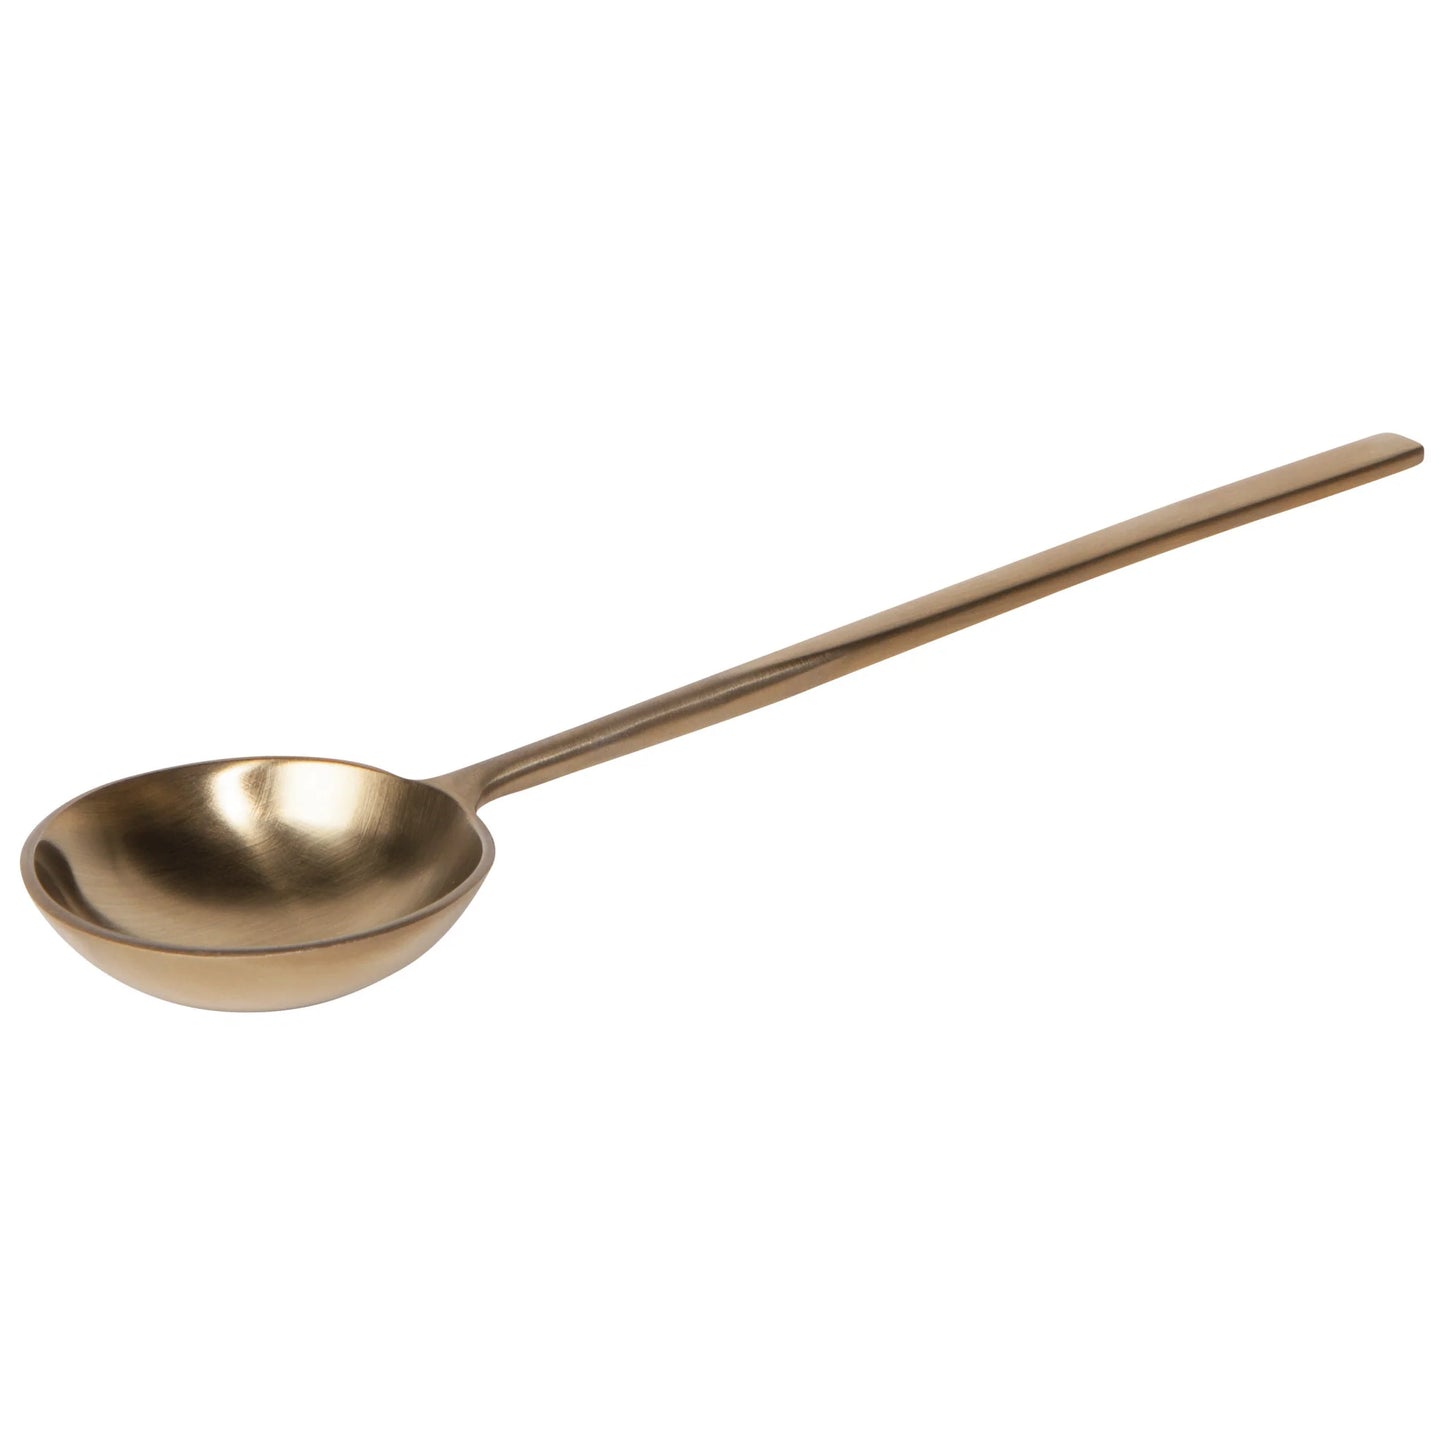 Brushed Gold Stainless Steel Long Spoons - Set of 4